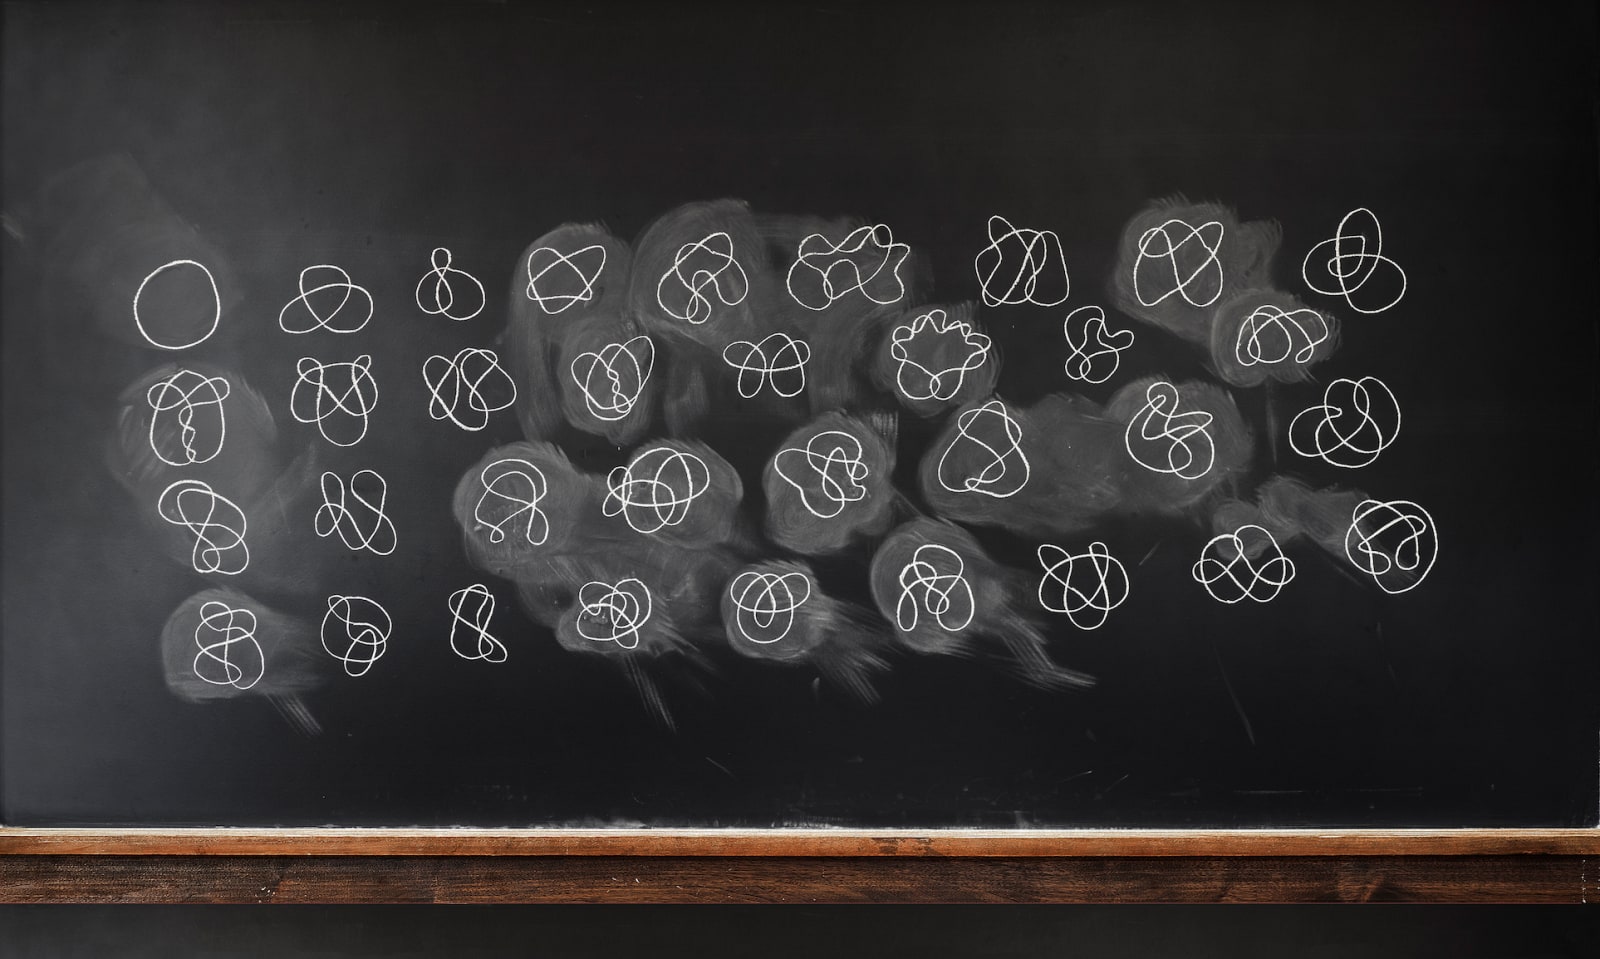 Chalkboard depicting knot theory formula from Do Not Erase series by Jessica Wynne